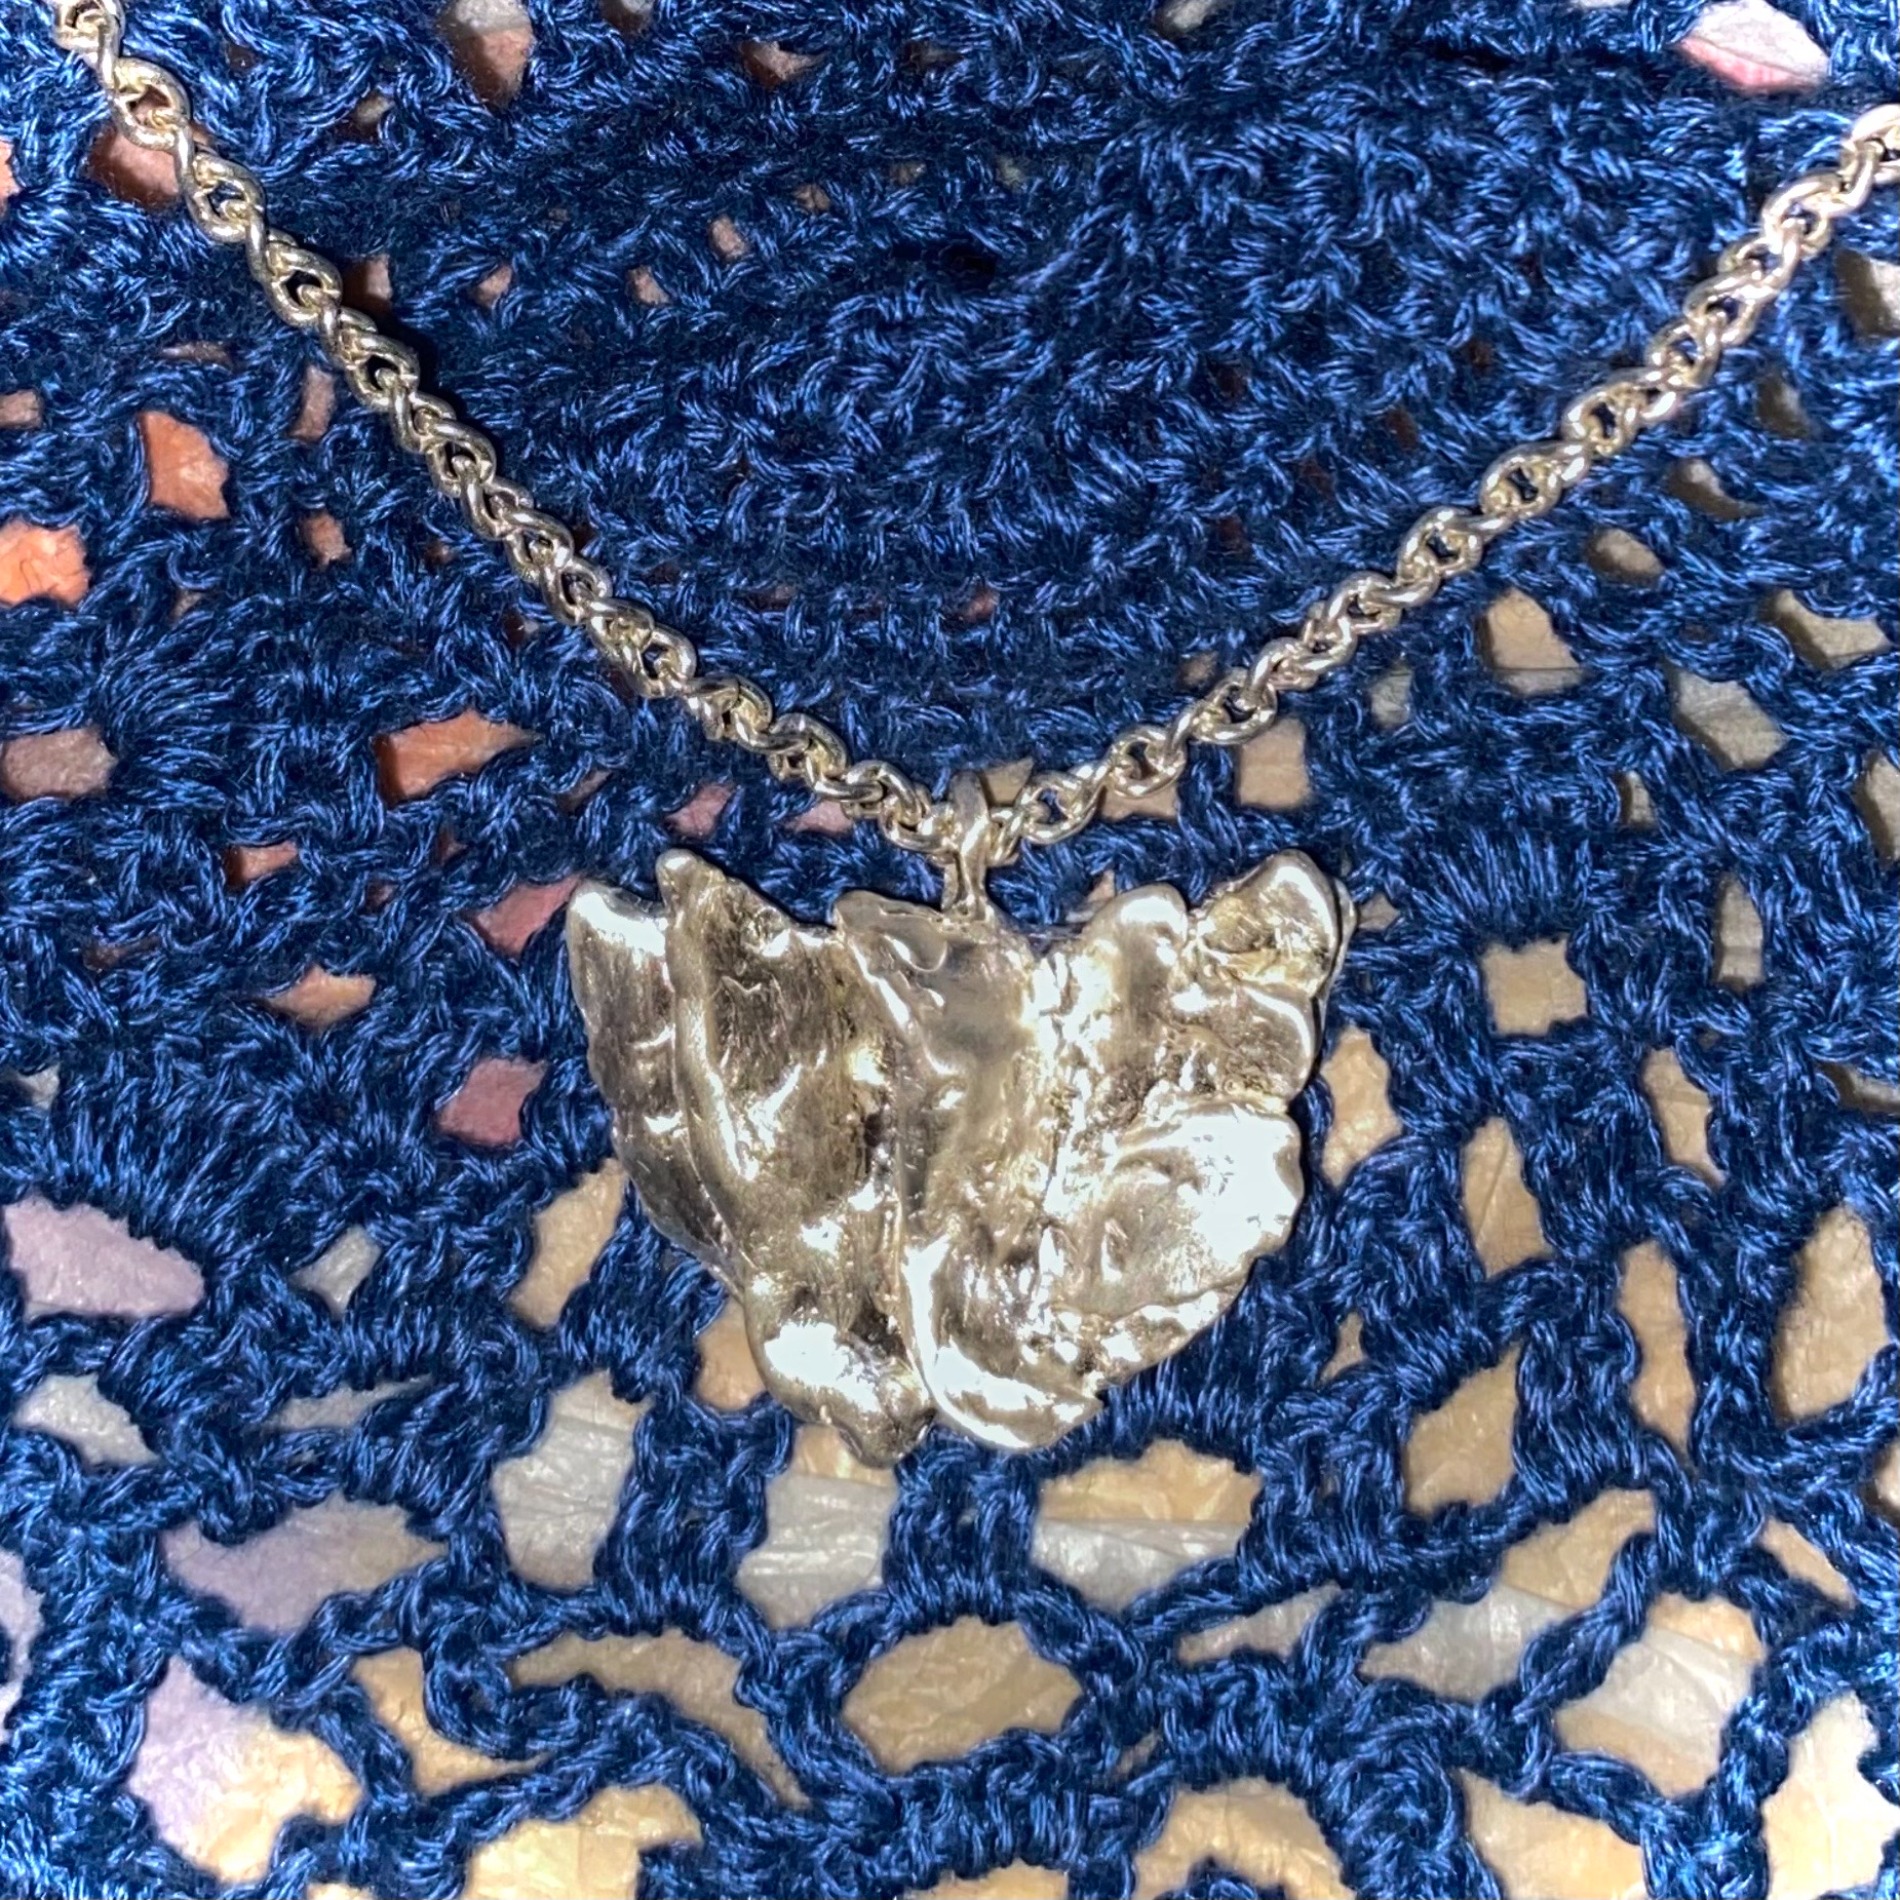 Seashell necklace 6th